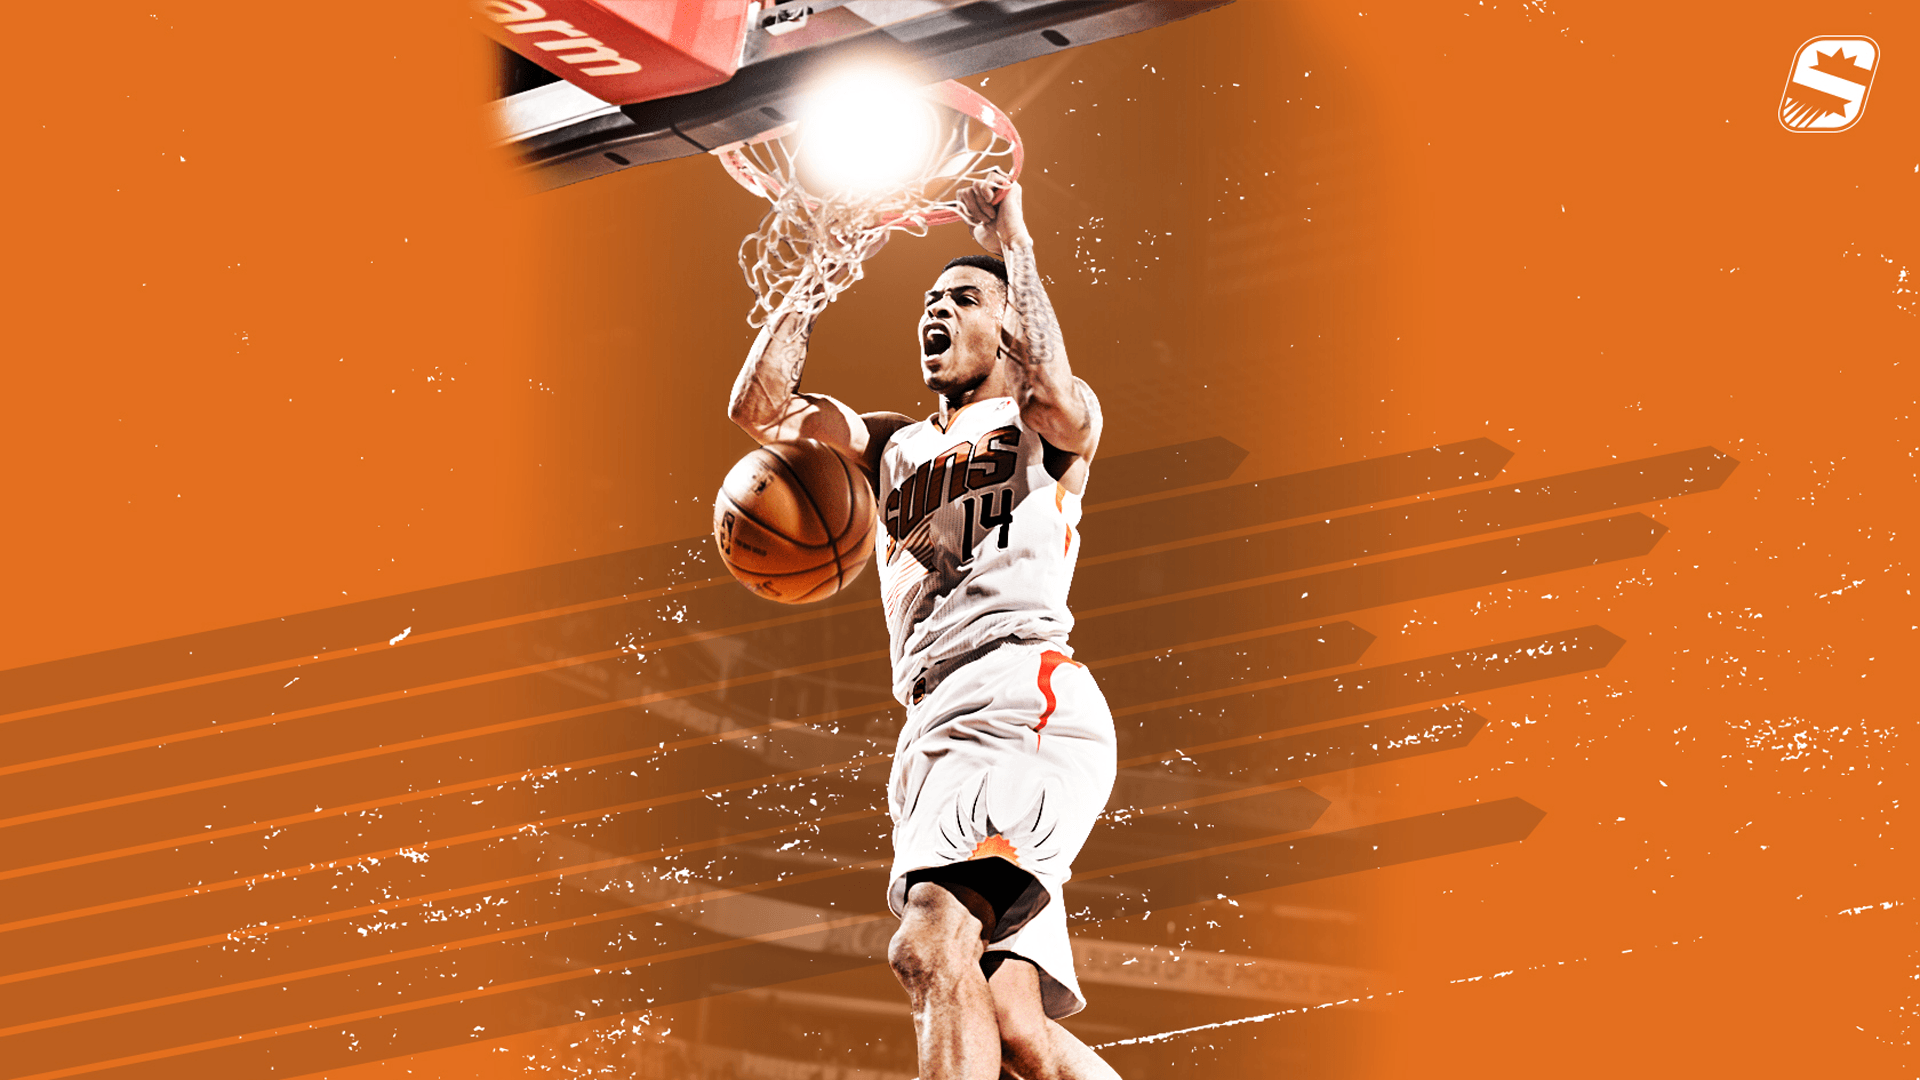 Phoenix Suns on X: 📲 Need a fresh wallpaper? We've got you covered!  #WeAreTheValley  / X